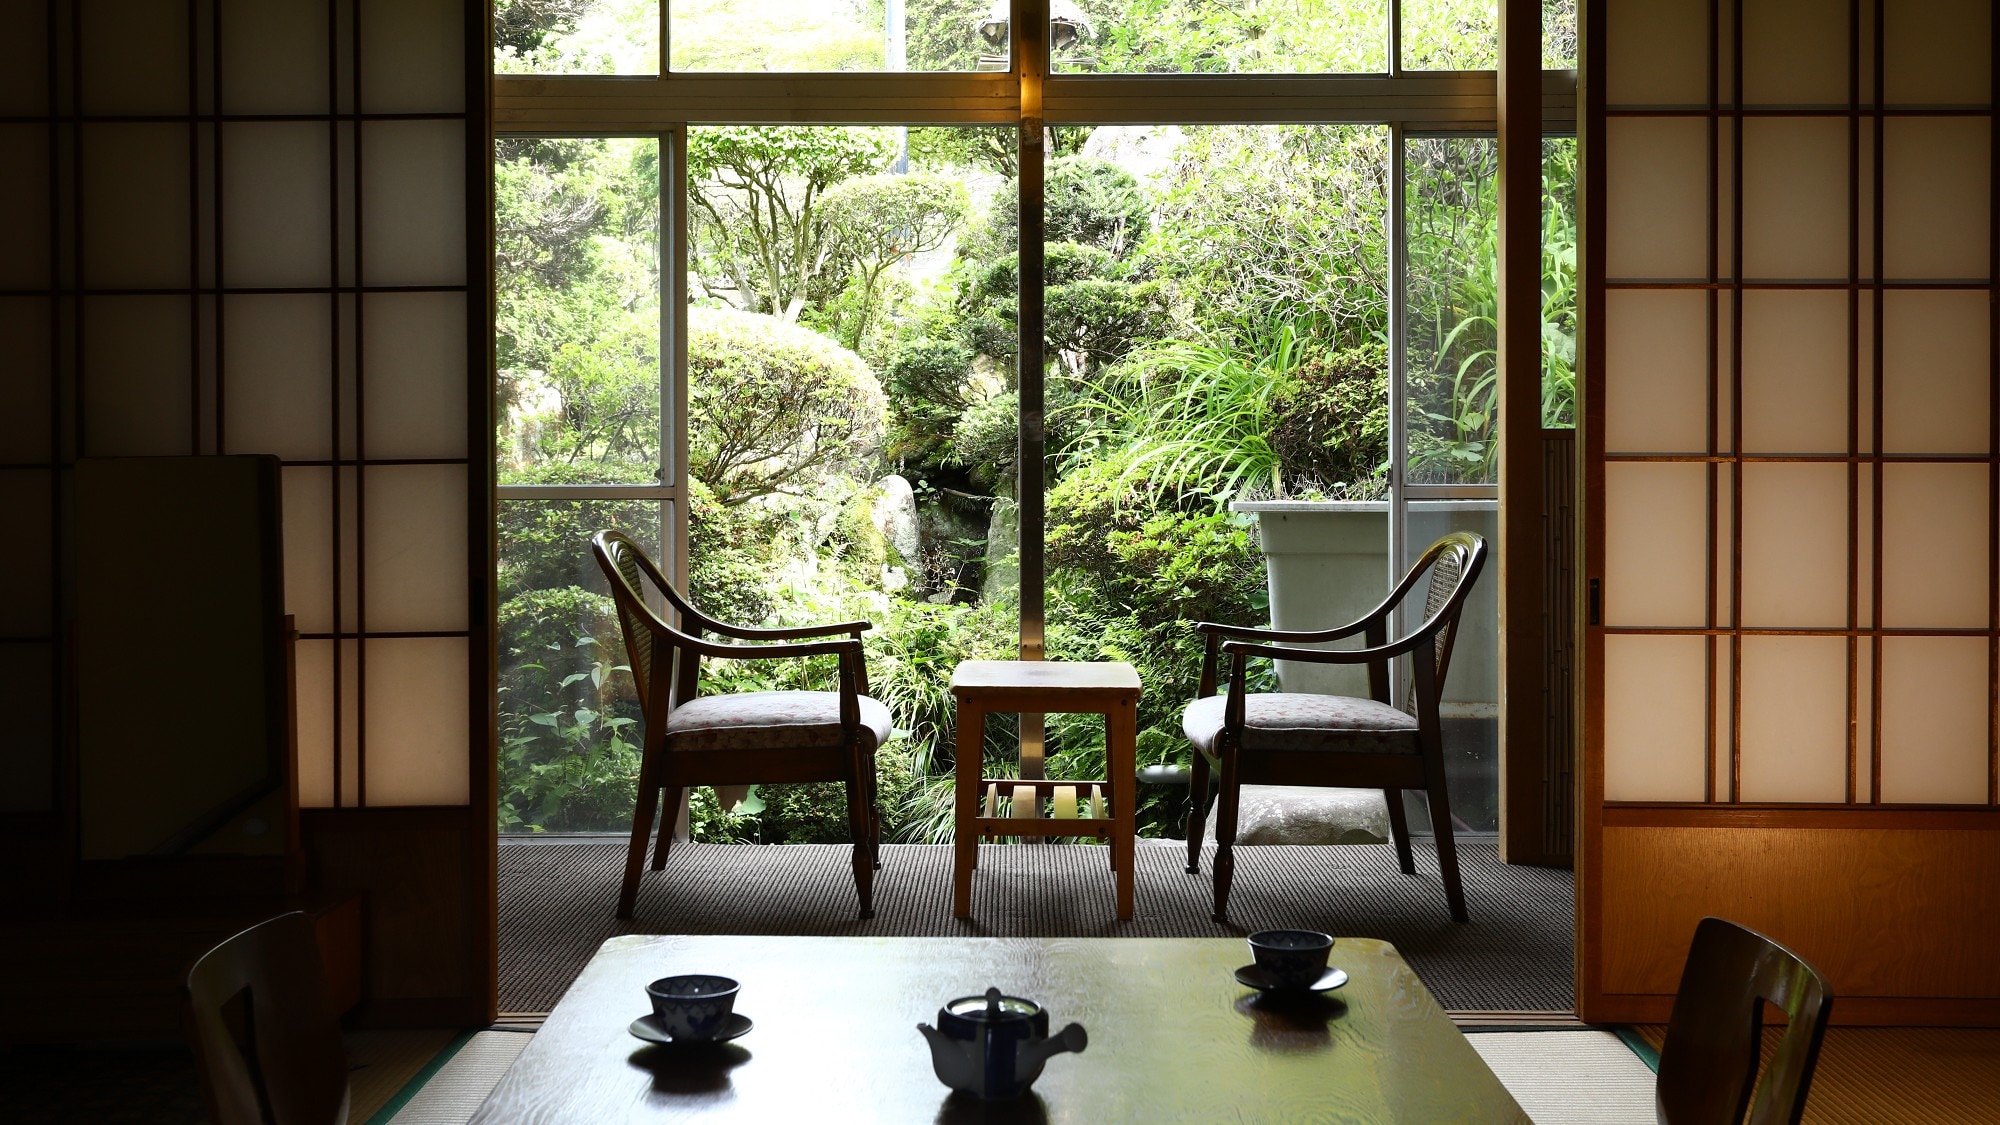 ■An example of pure Japanese-style room